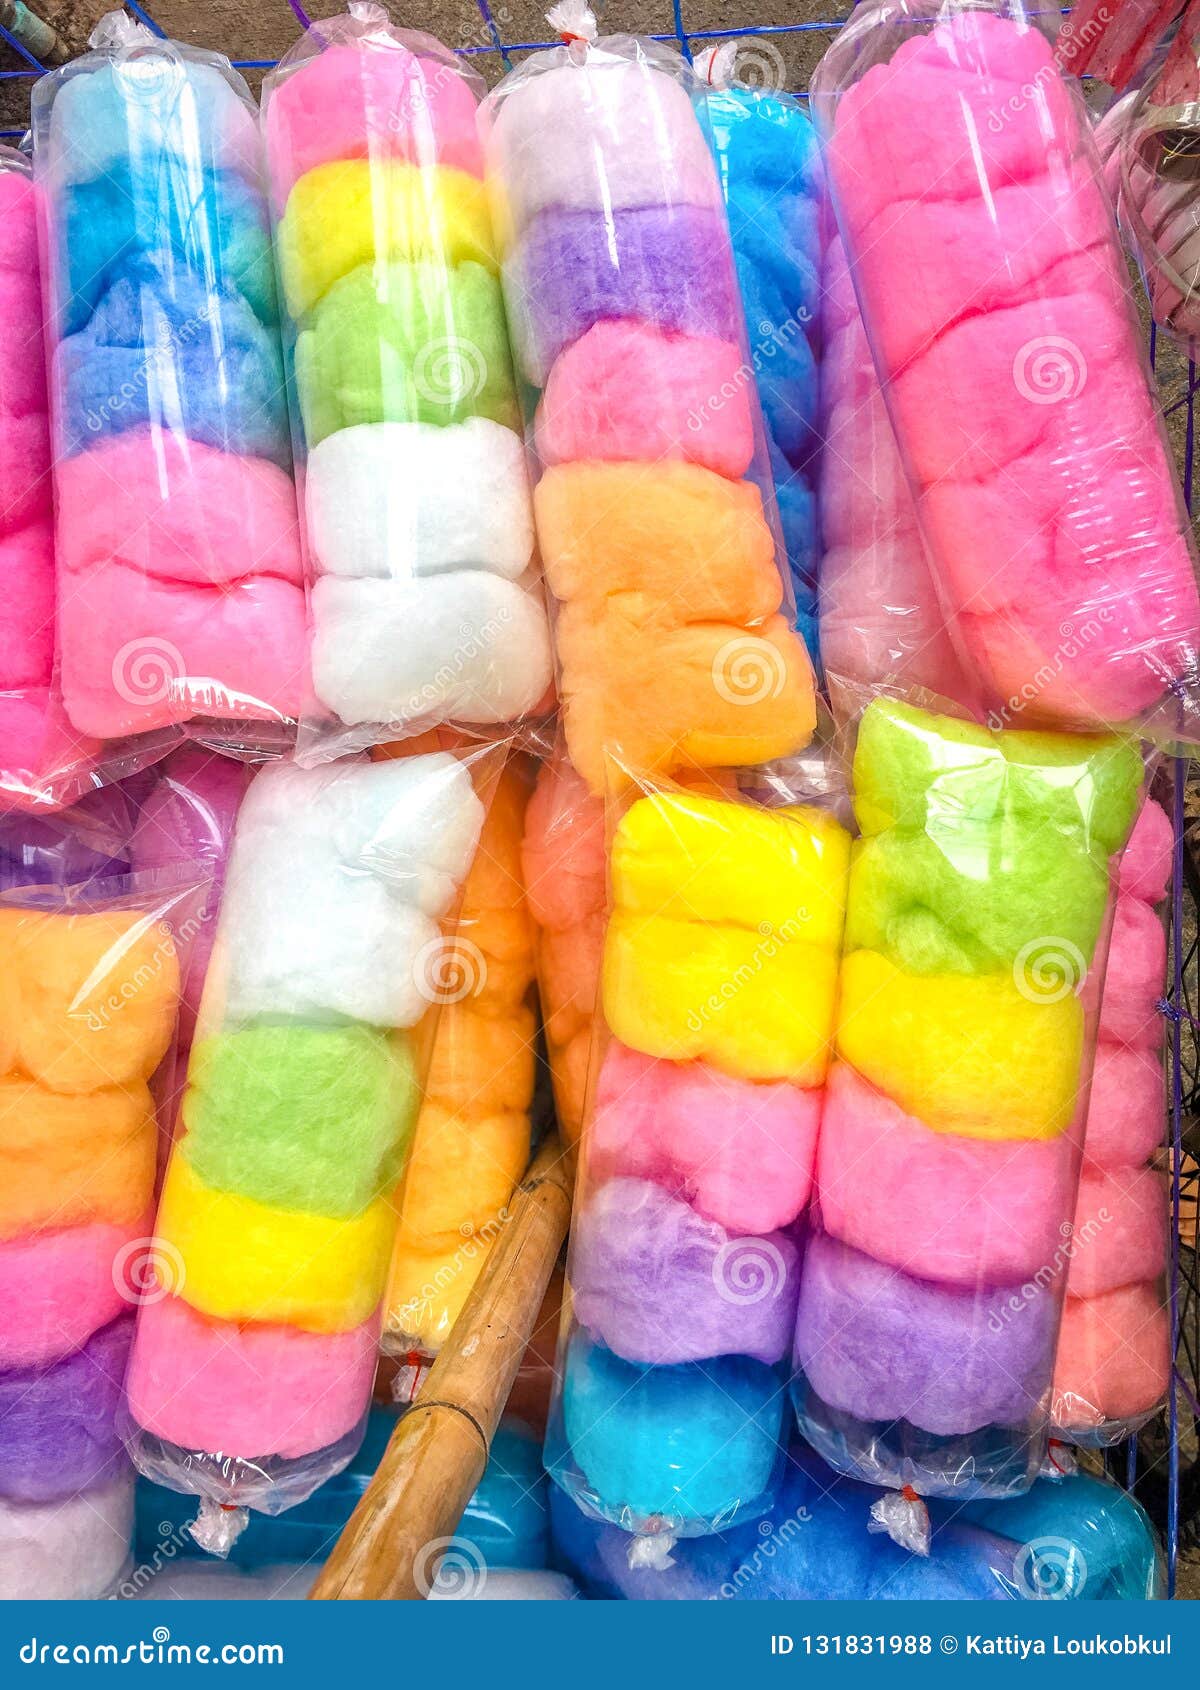 Colourful Candy Floss or Candy Floss Bags Stock Photo - Image of thai ...